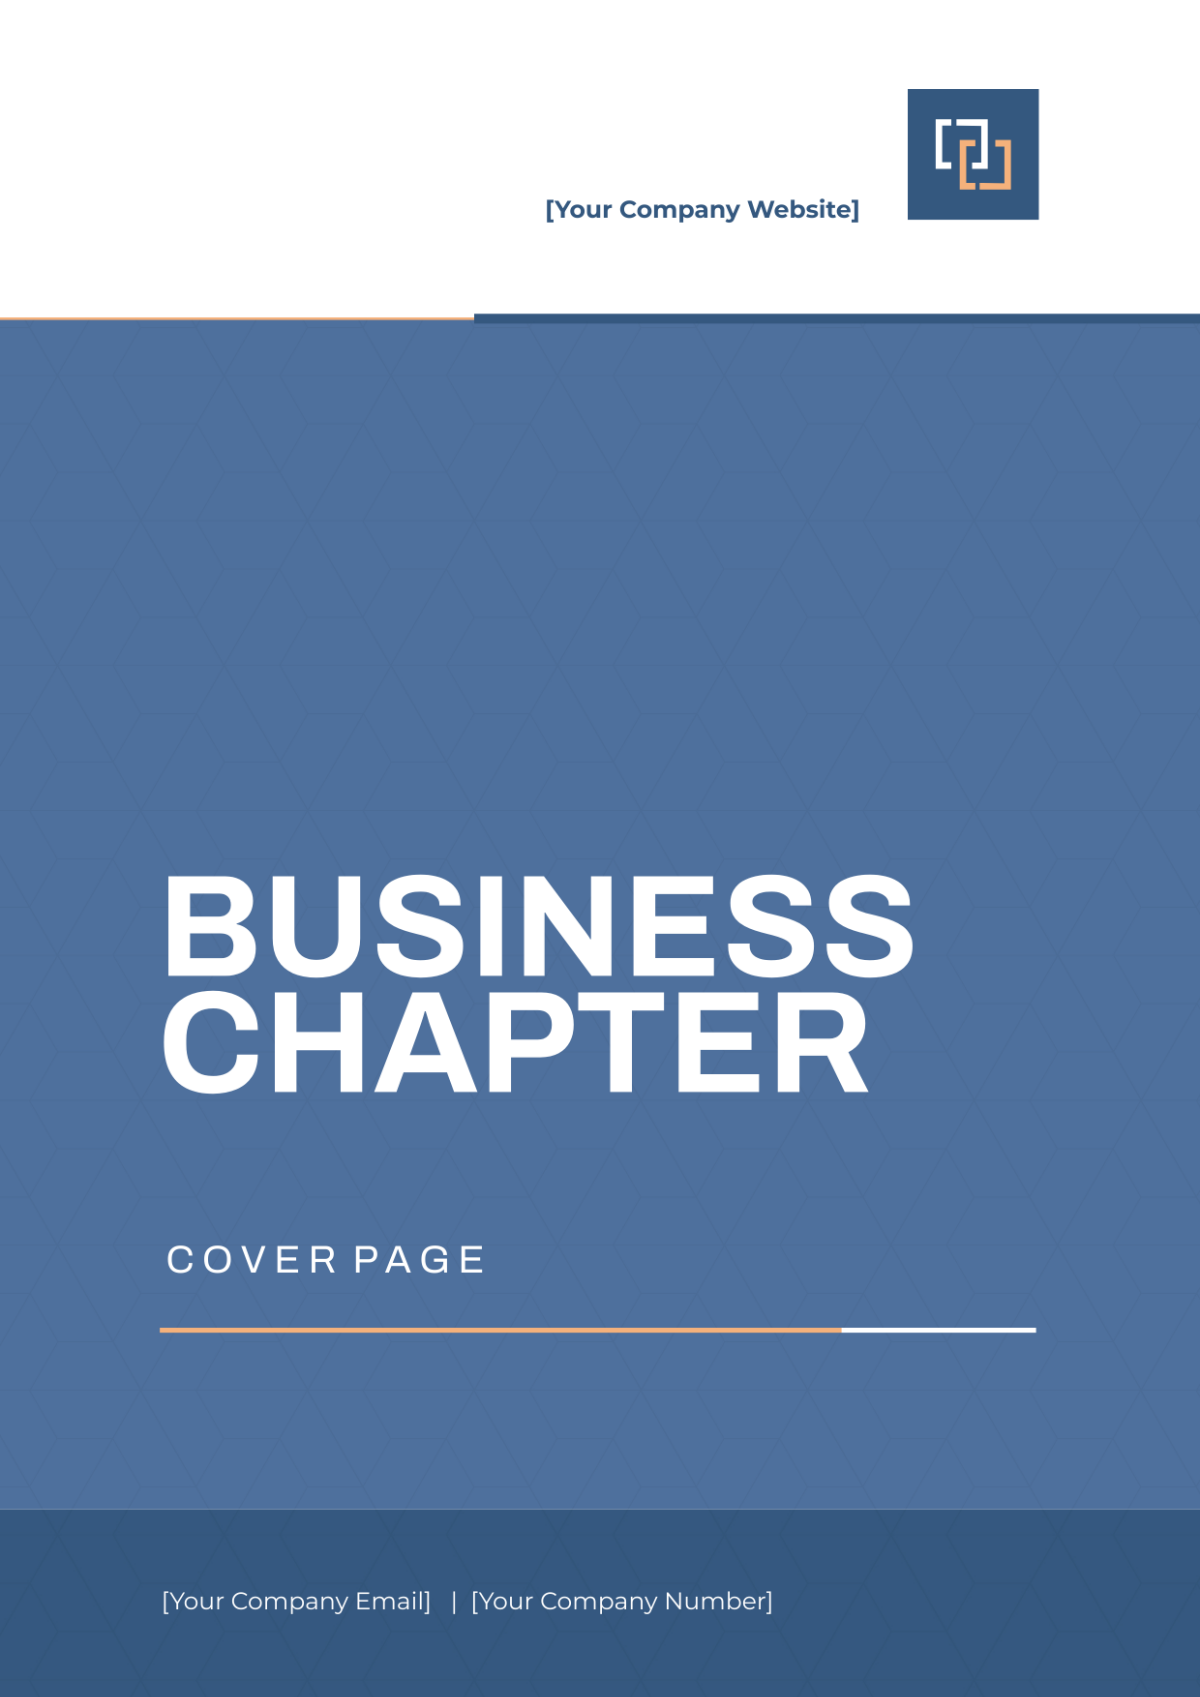 Business Chapter Cover Page